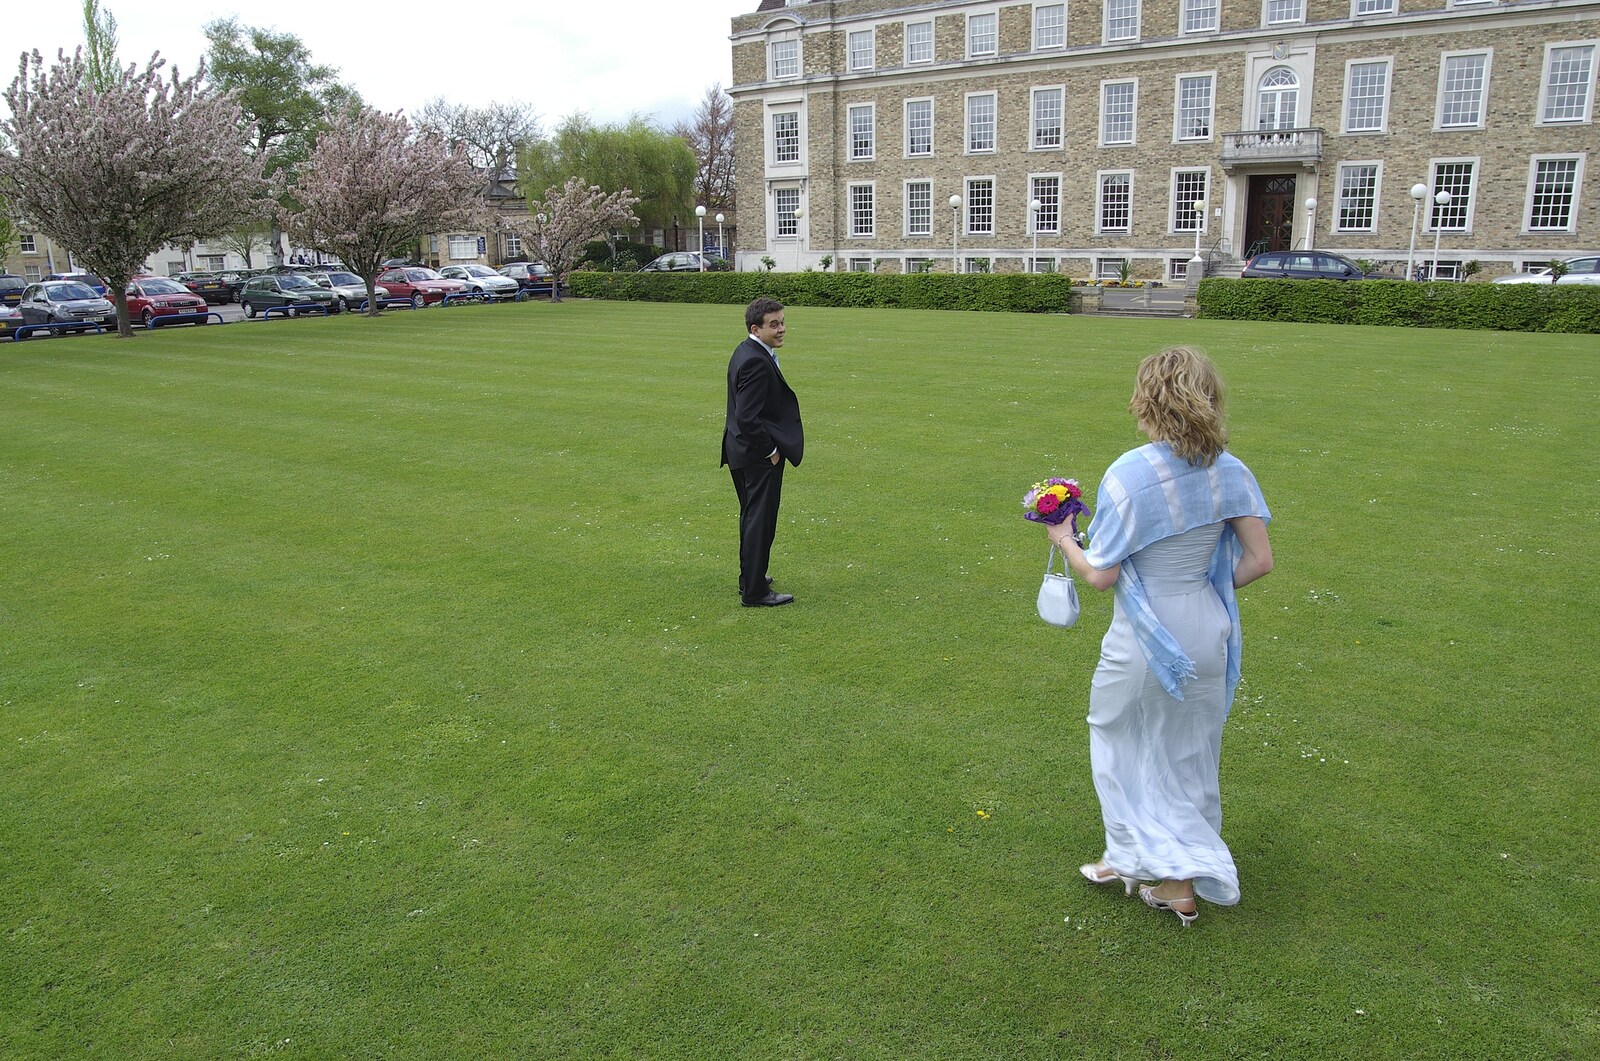 Hani and Anne's Wedding, County Hall, Cambridge - 2nd May 2008: Hani and Anne on the lawn